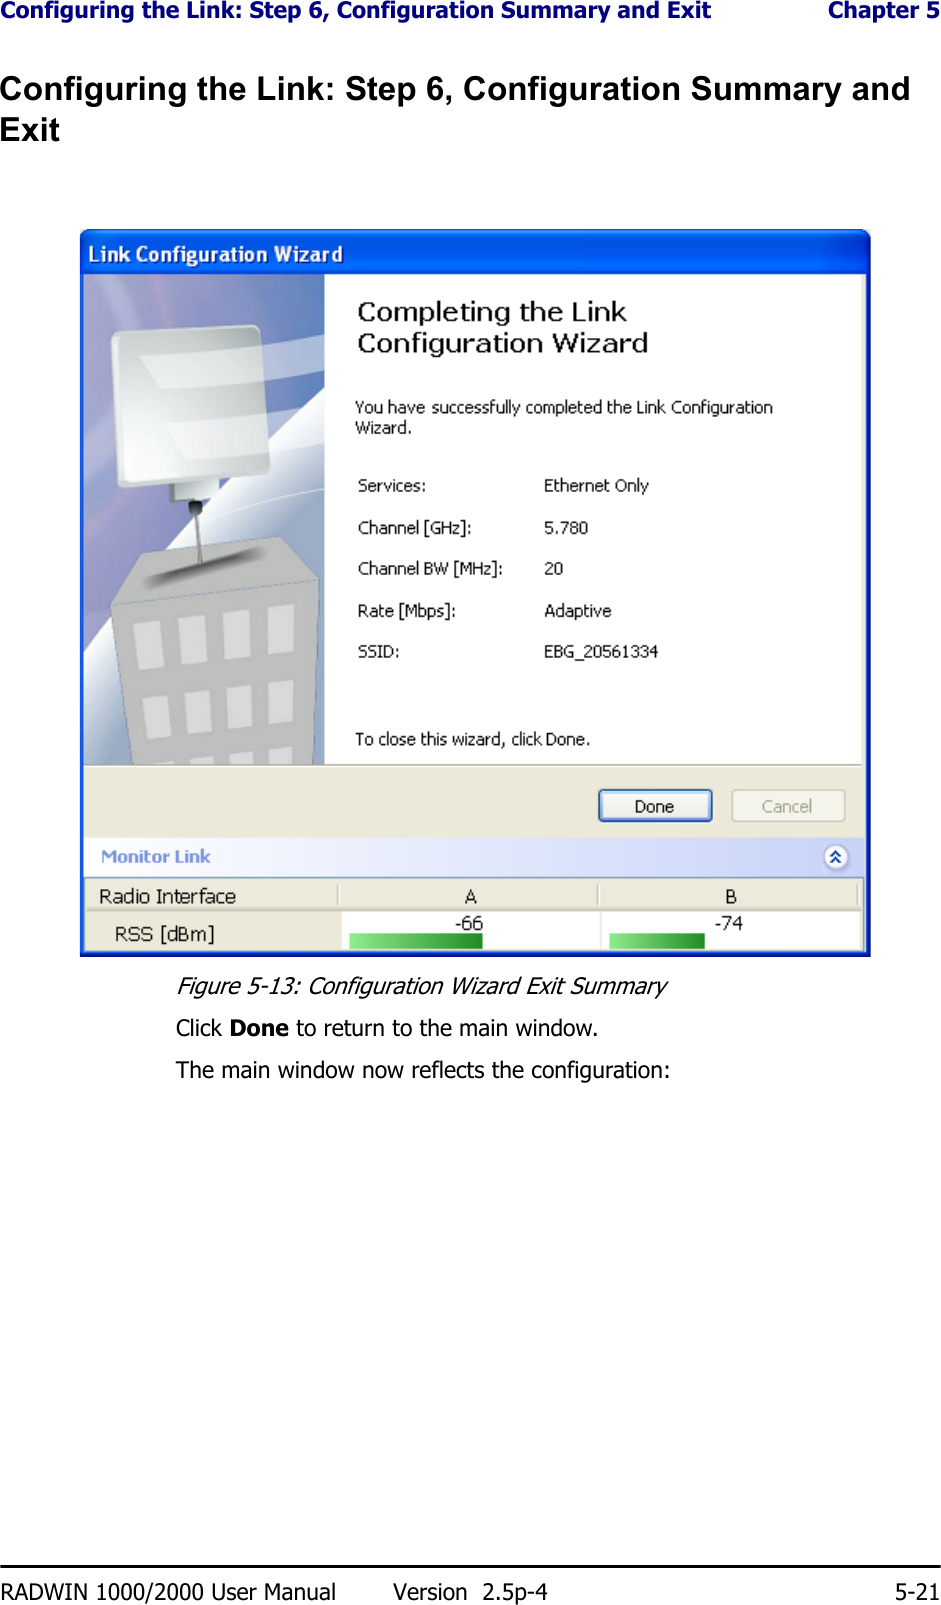 Configuring the Link: Step 6, Configuration Summary and Exit  Chapter 5RADWIN 1000/2000 User Manual Version  2.5p-4 5-21Configuring the Link: Step 6, Configuration Summary and ExitFigure 5-13: Configuration Wizard Exit Summary Click Done to return to the main window.The main window now reflects the configuration: